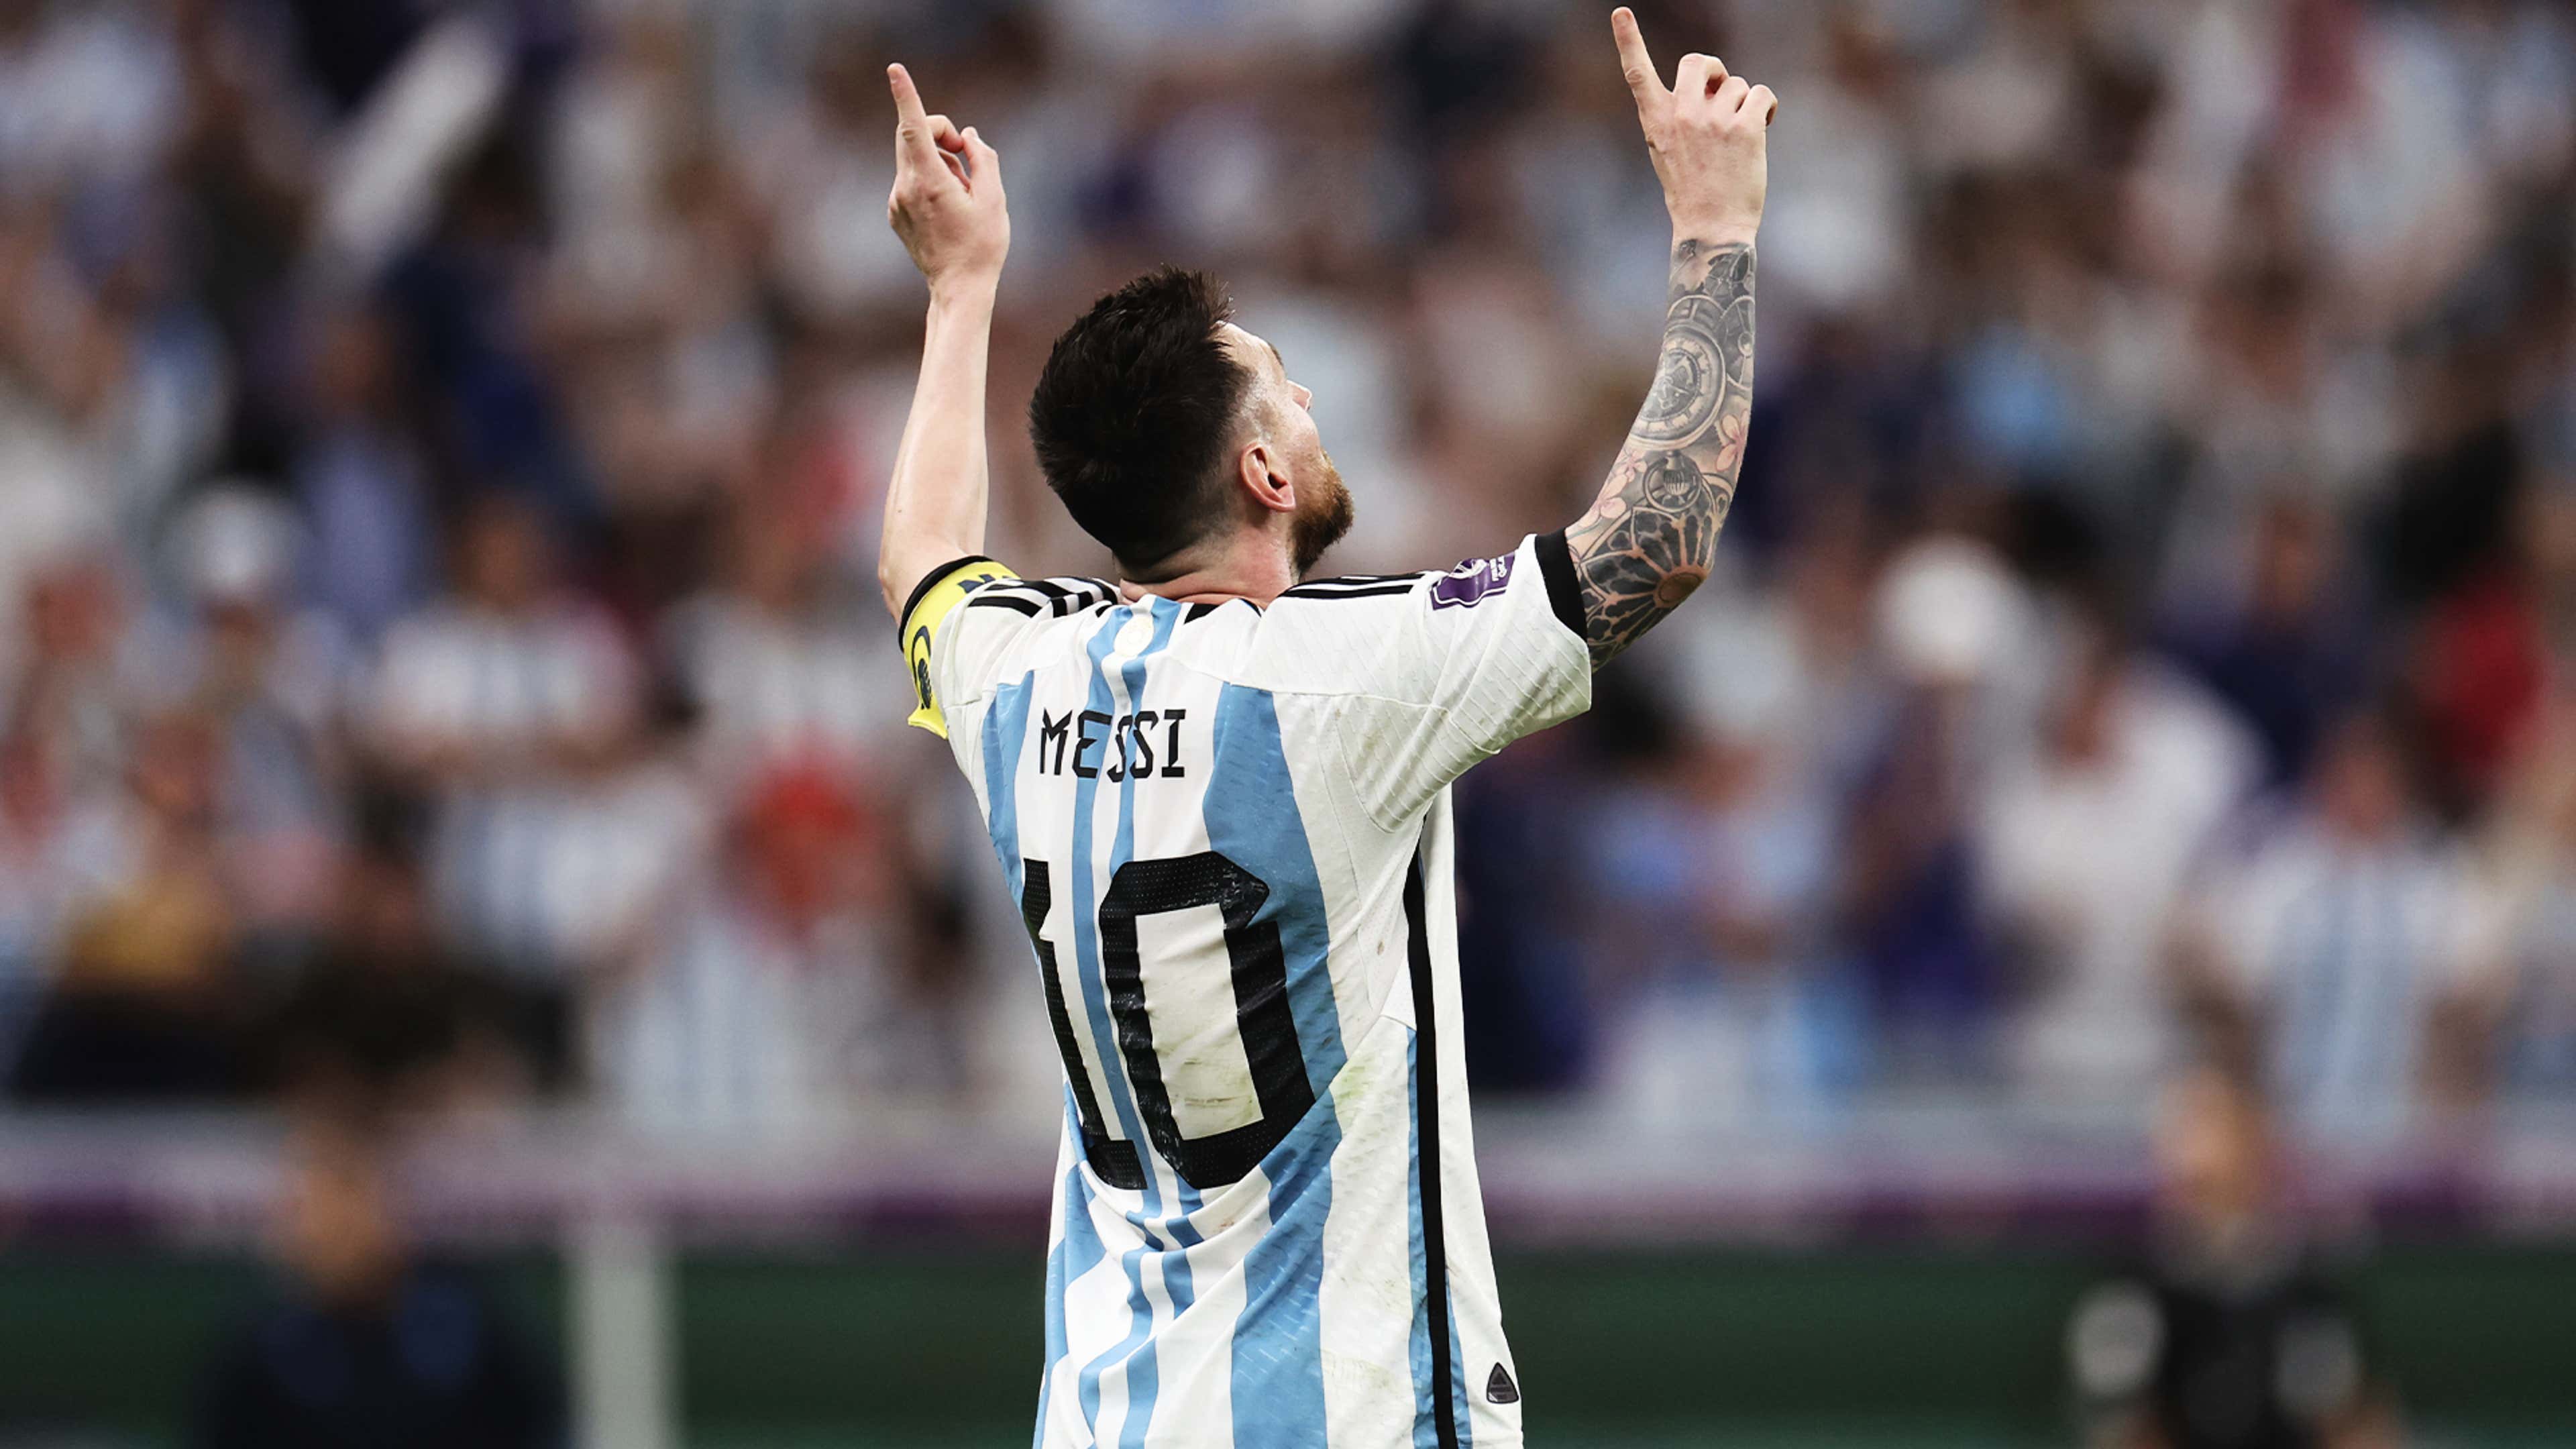 argentina away jersey 2022 world cup